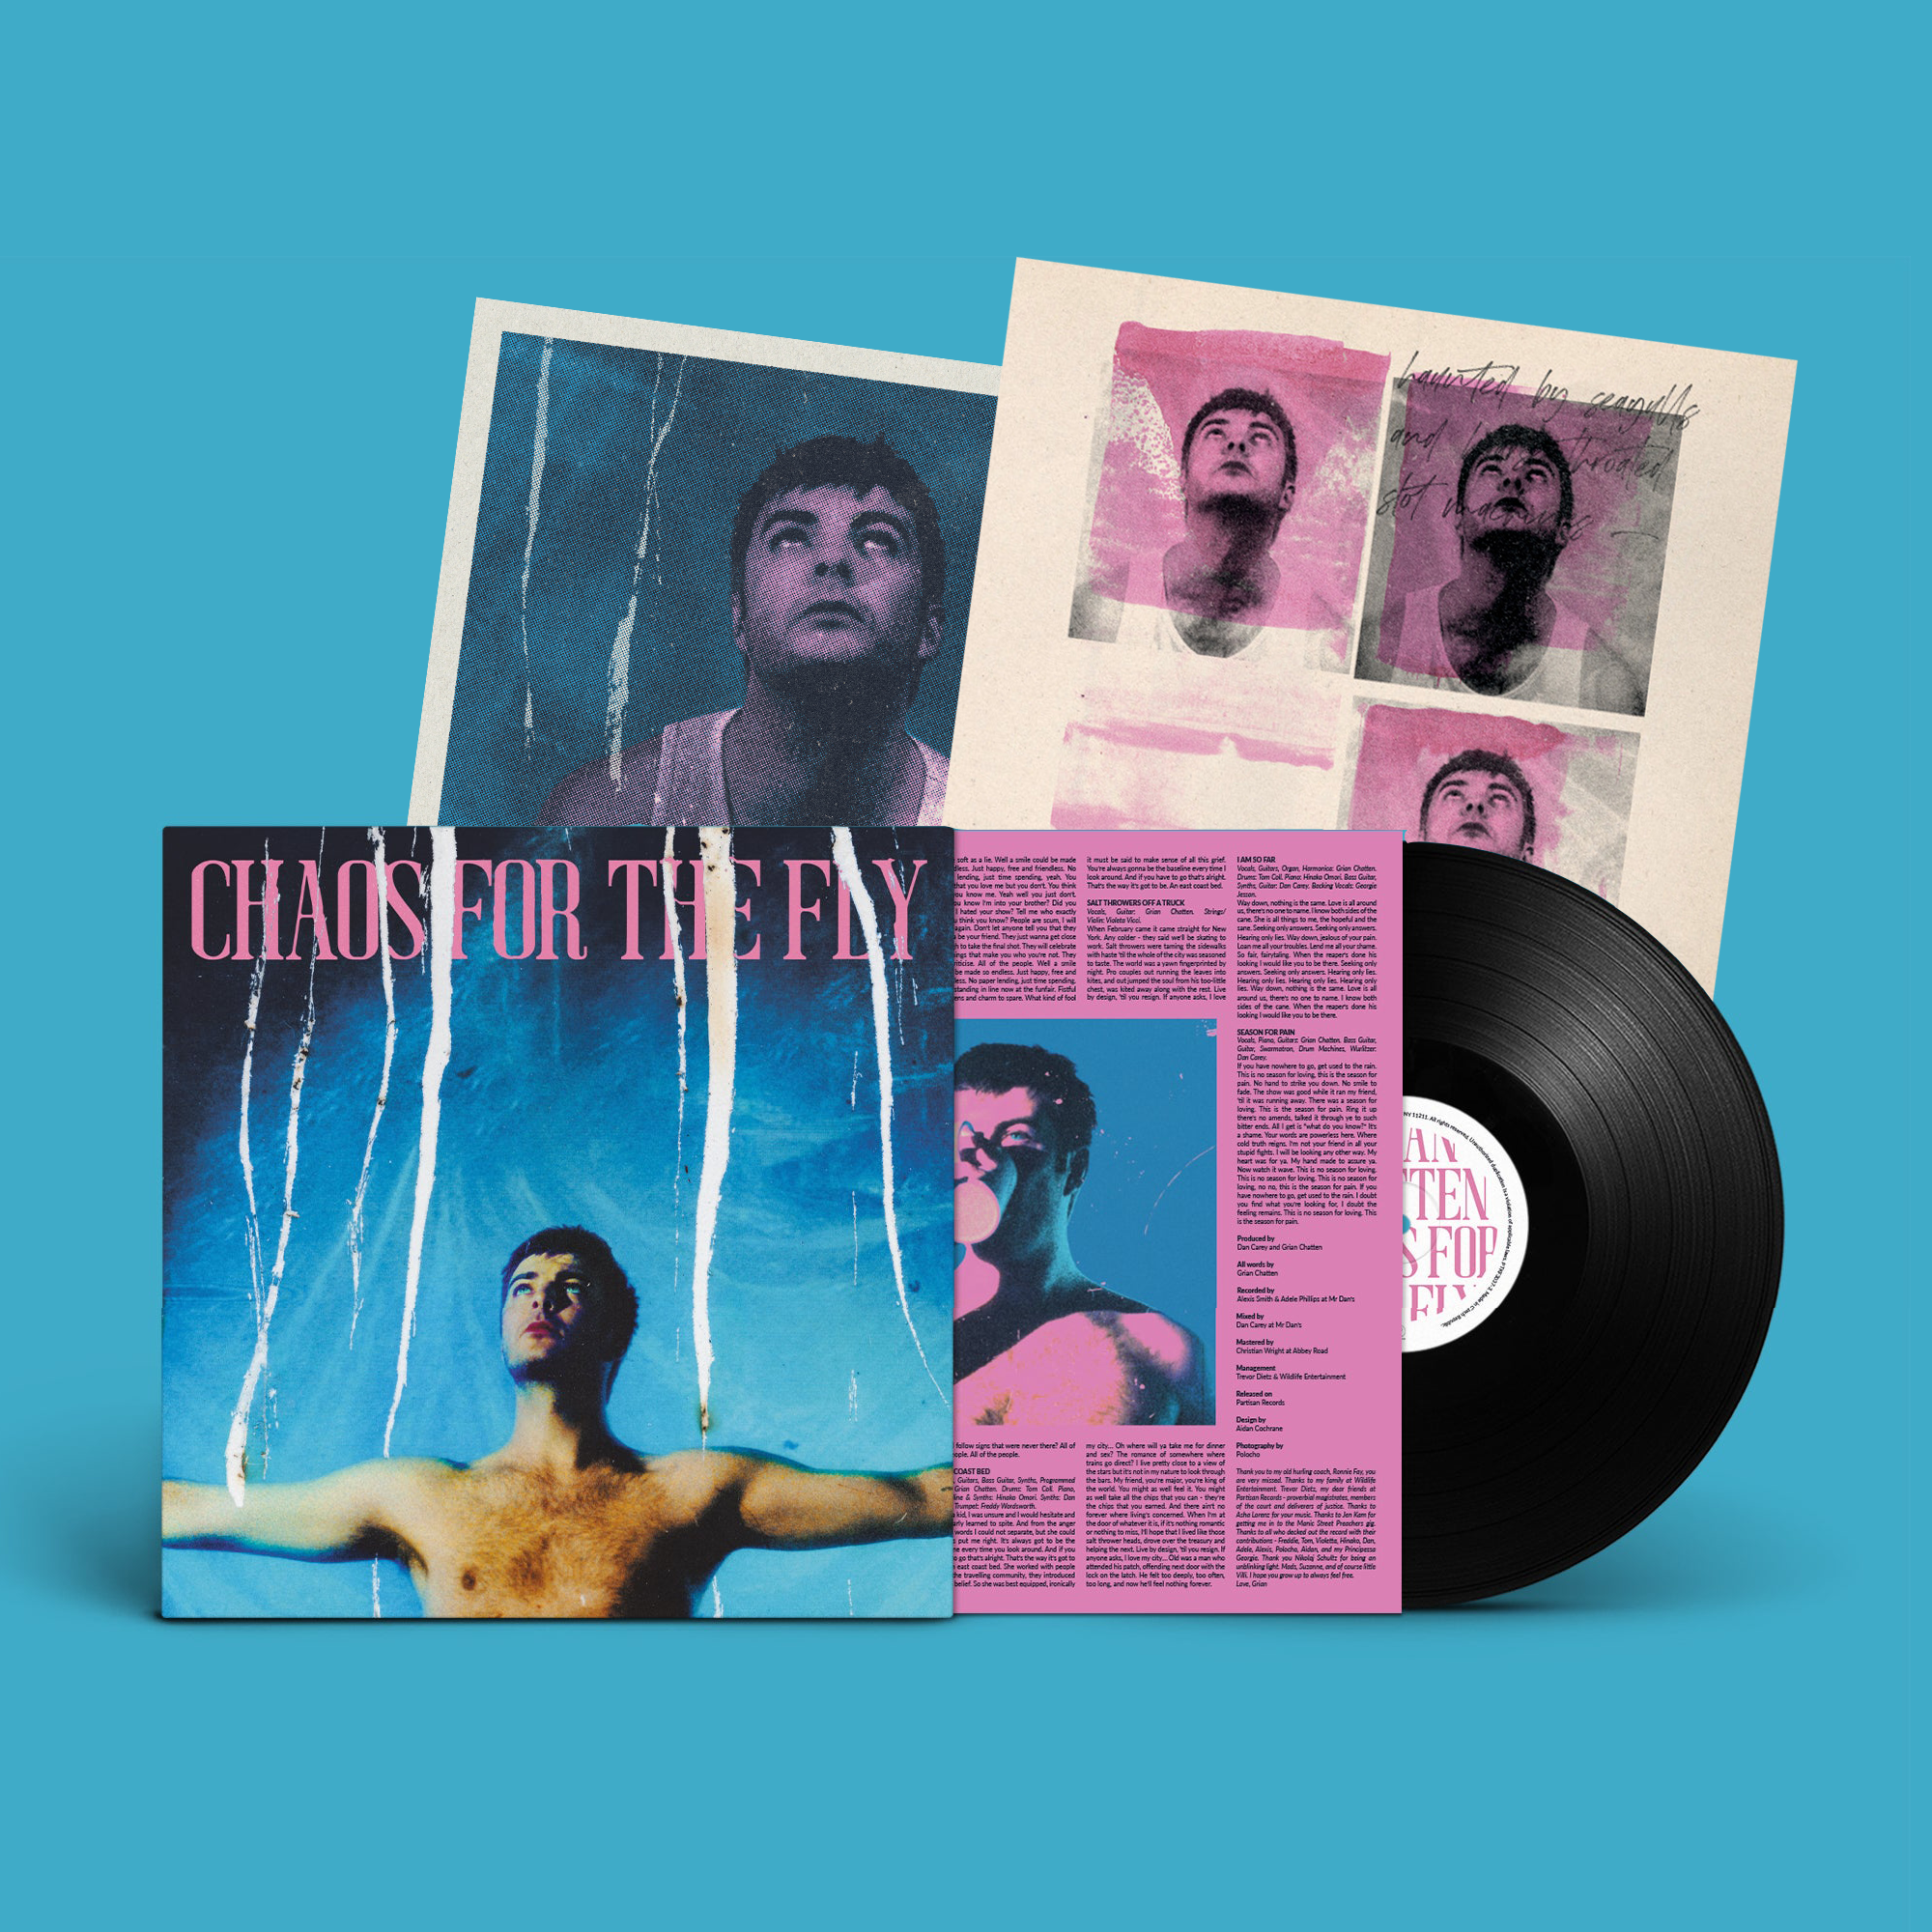 Chaos For The Fly: Vinyl LP + Exclusive Art Prints (#1 & #2)